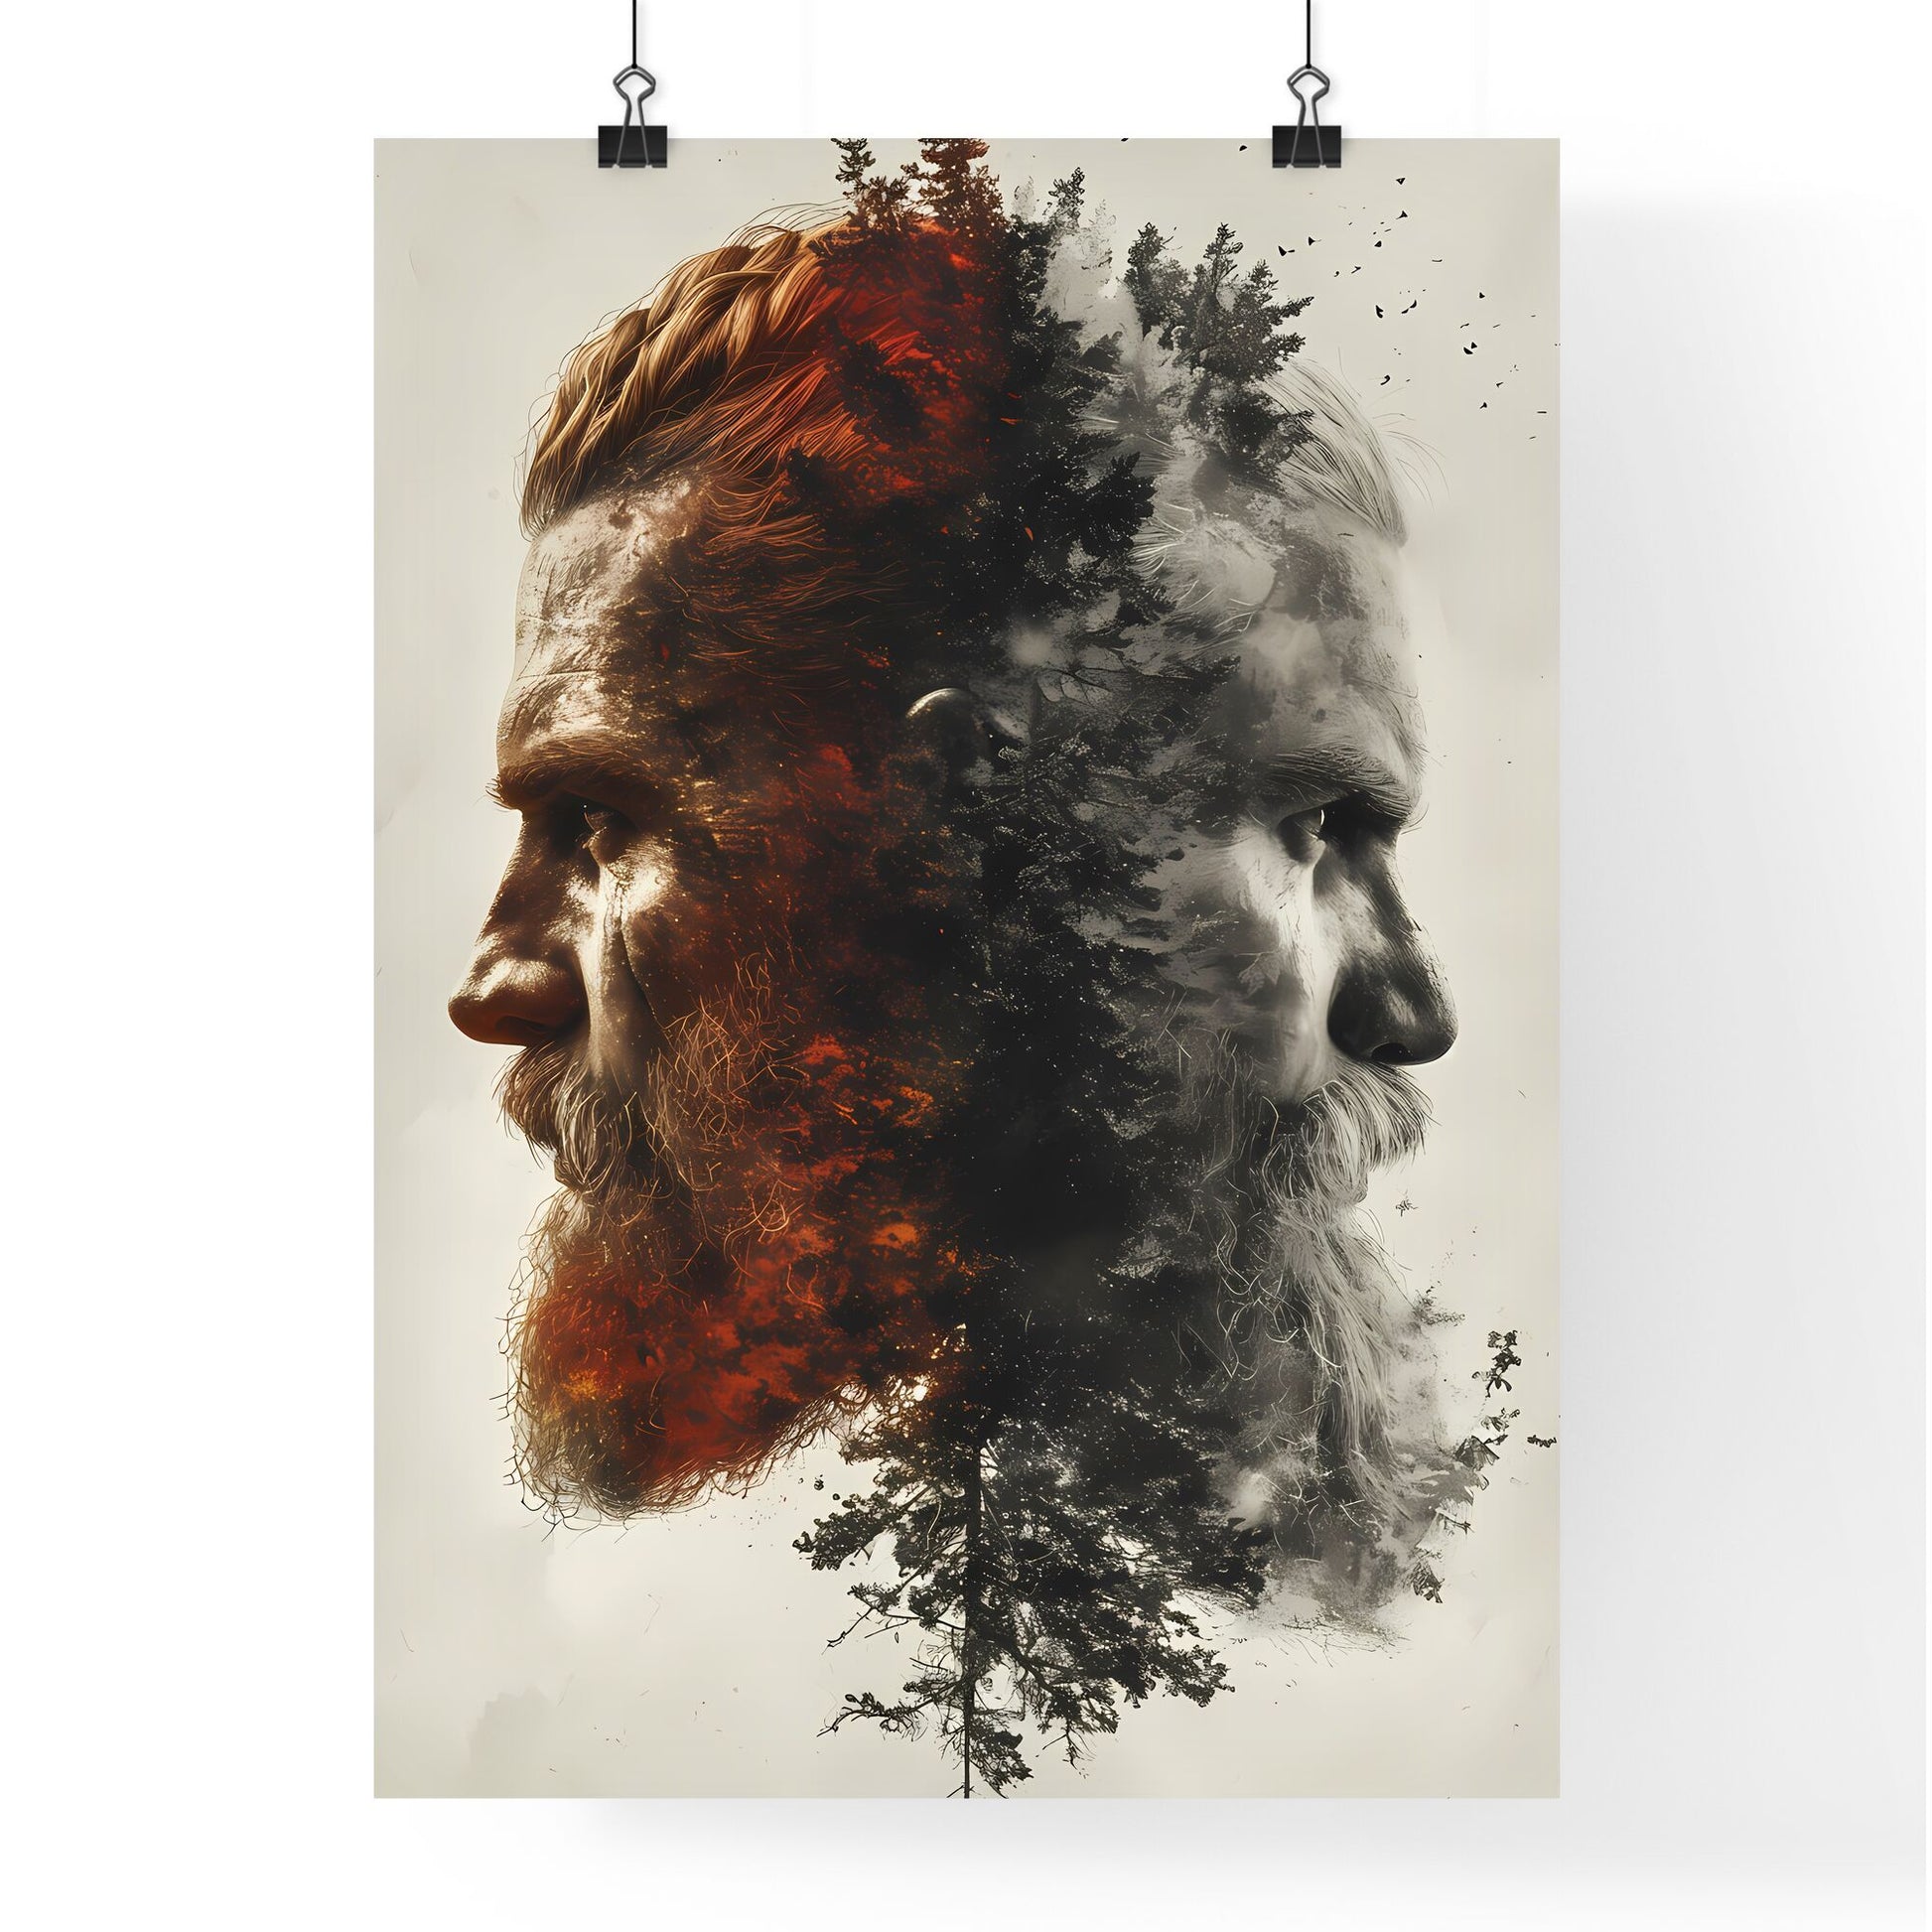 Half man half creature - Art print of a man with a beard and a tree Default Title